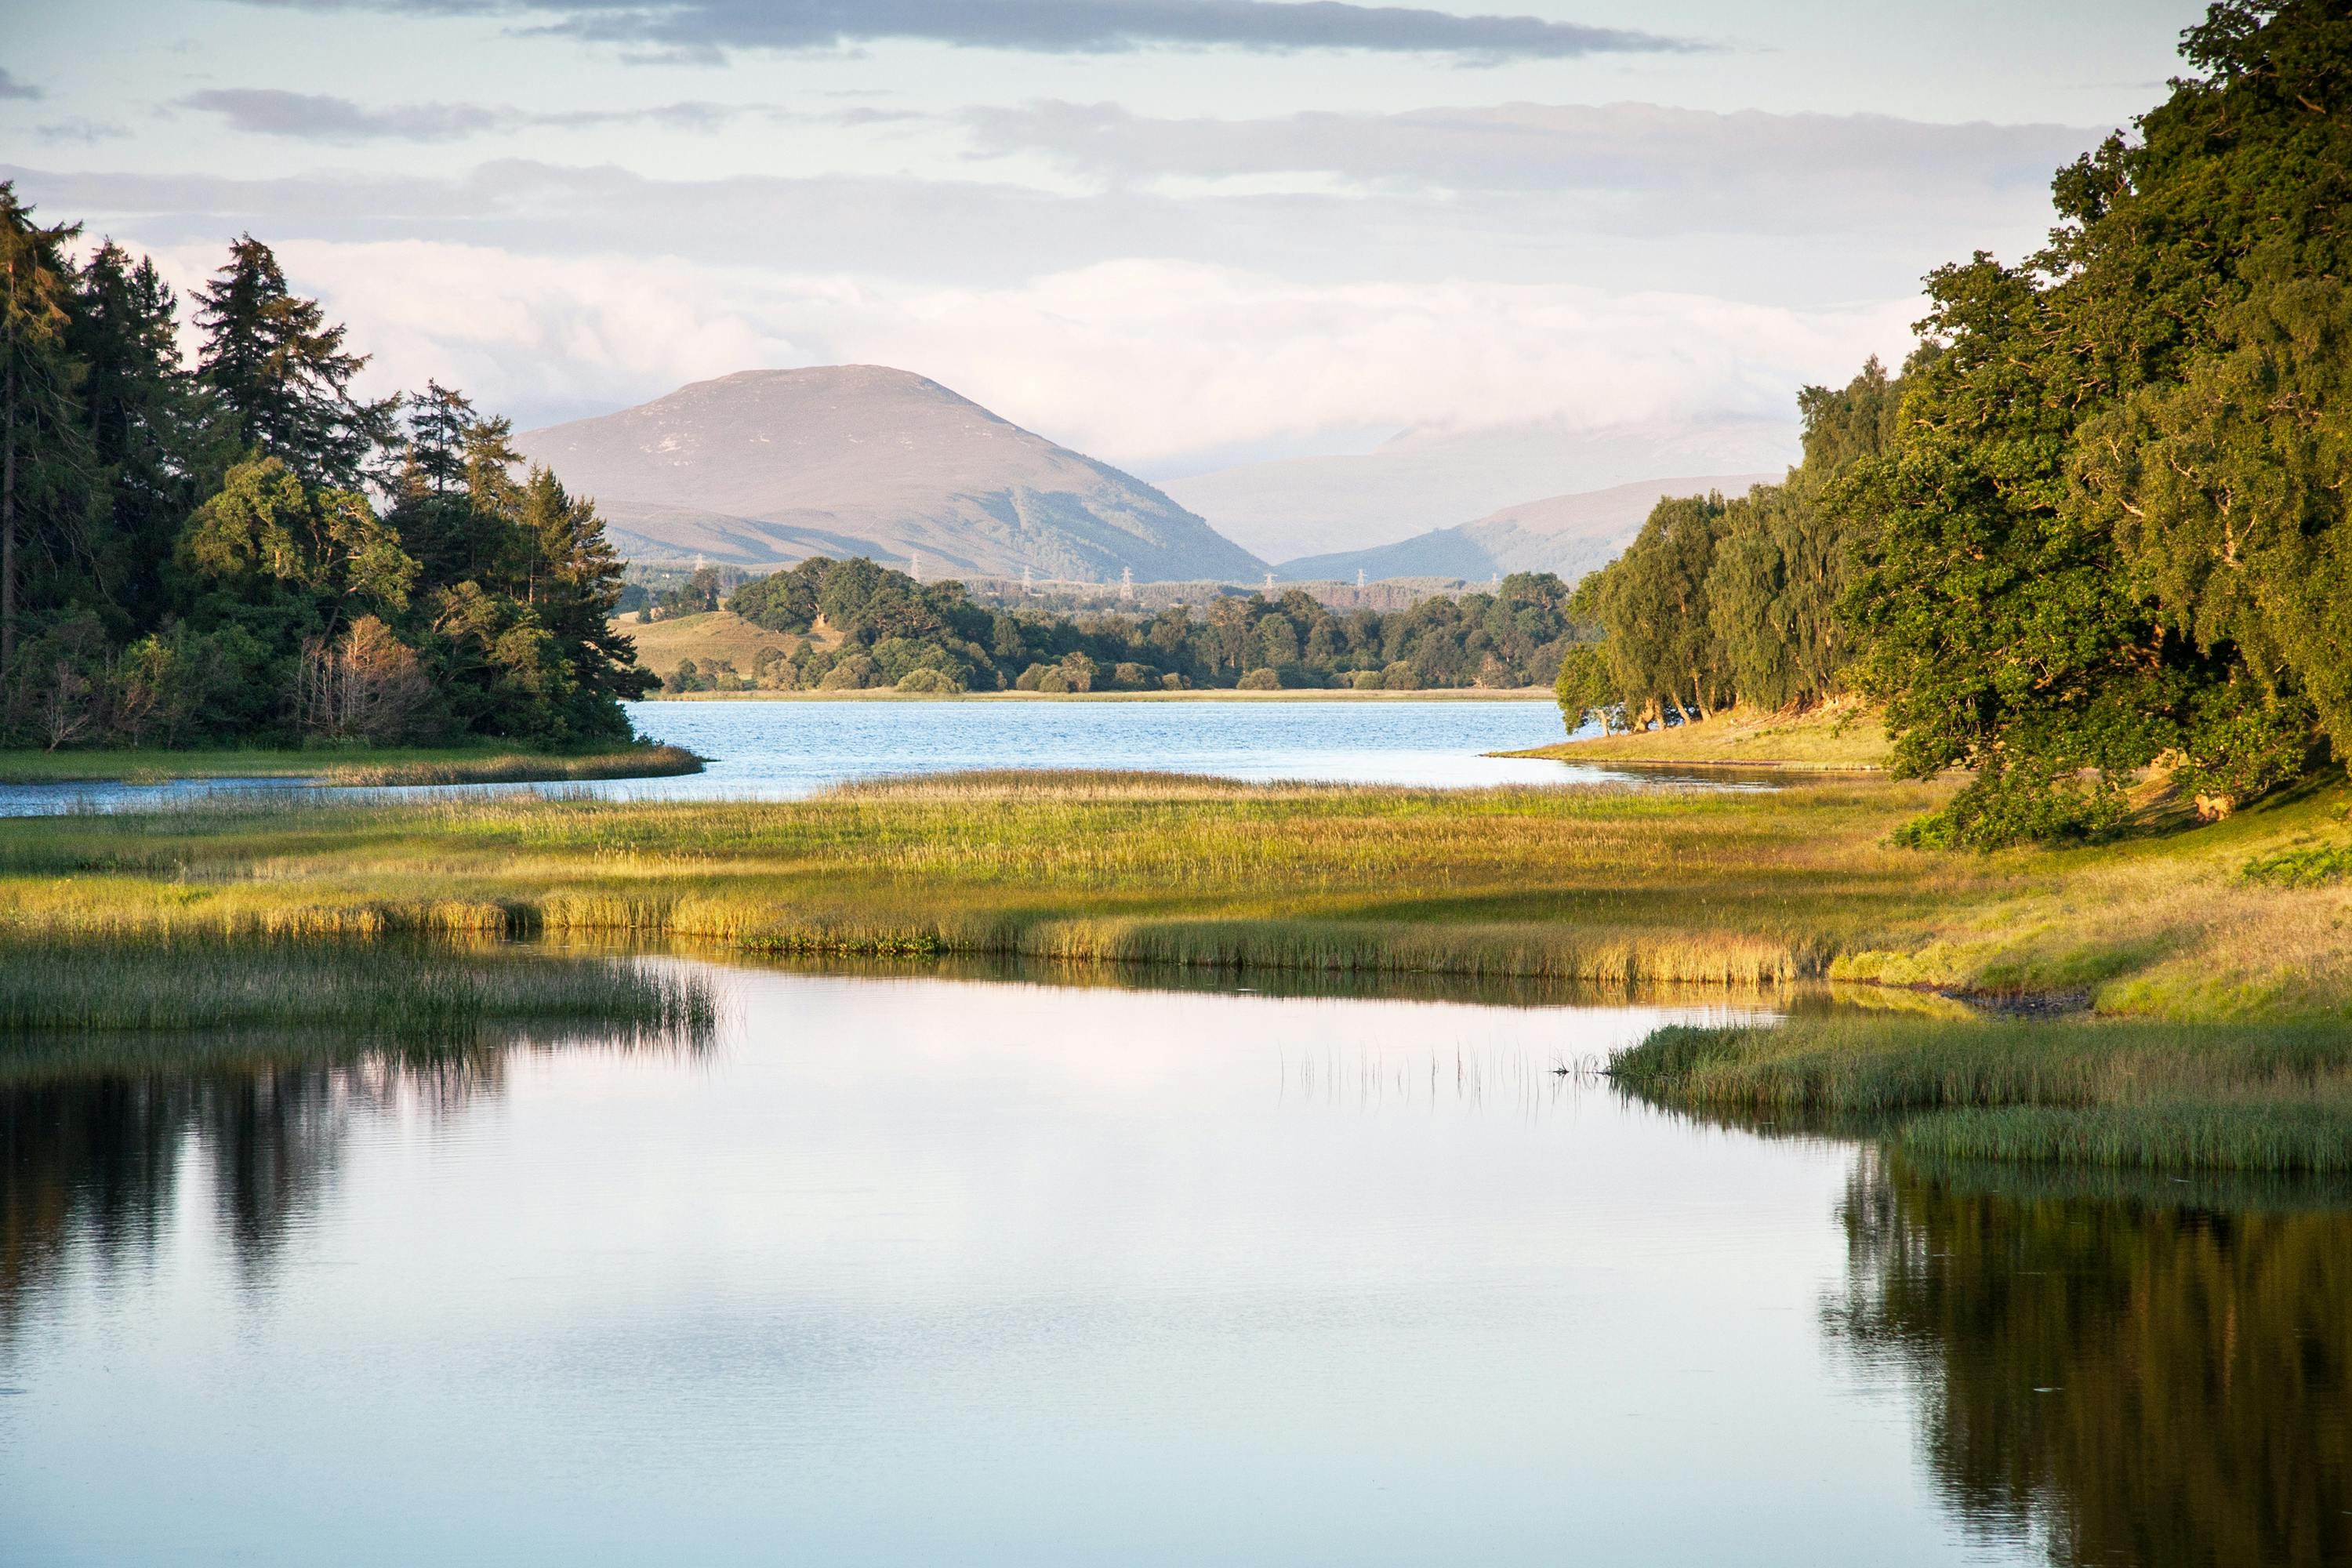 Cairngorms-Nationalpark und Speyside-Whisky-Tagestour ab Inverness